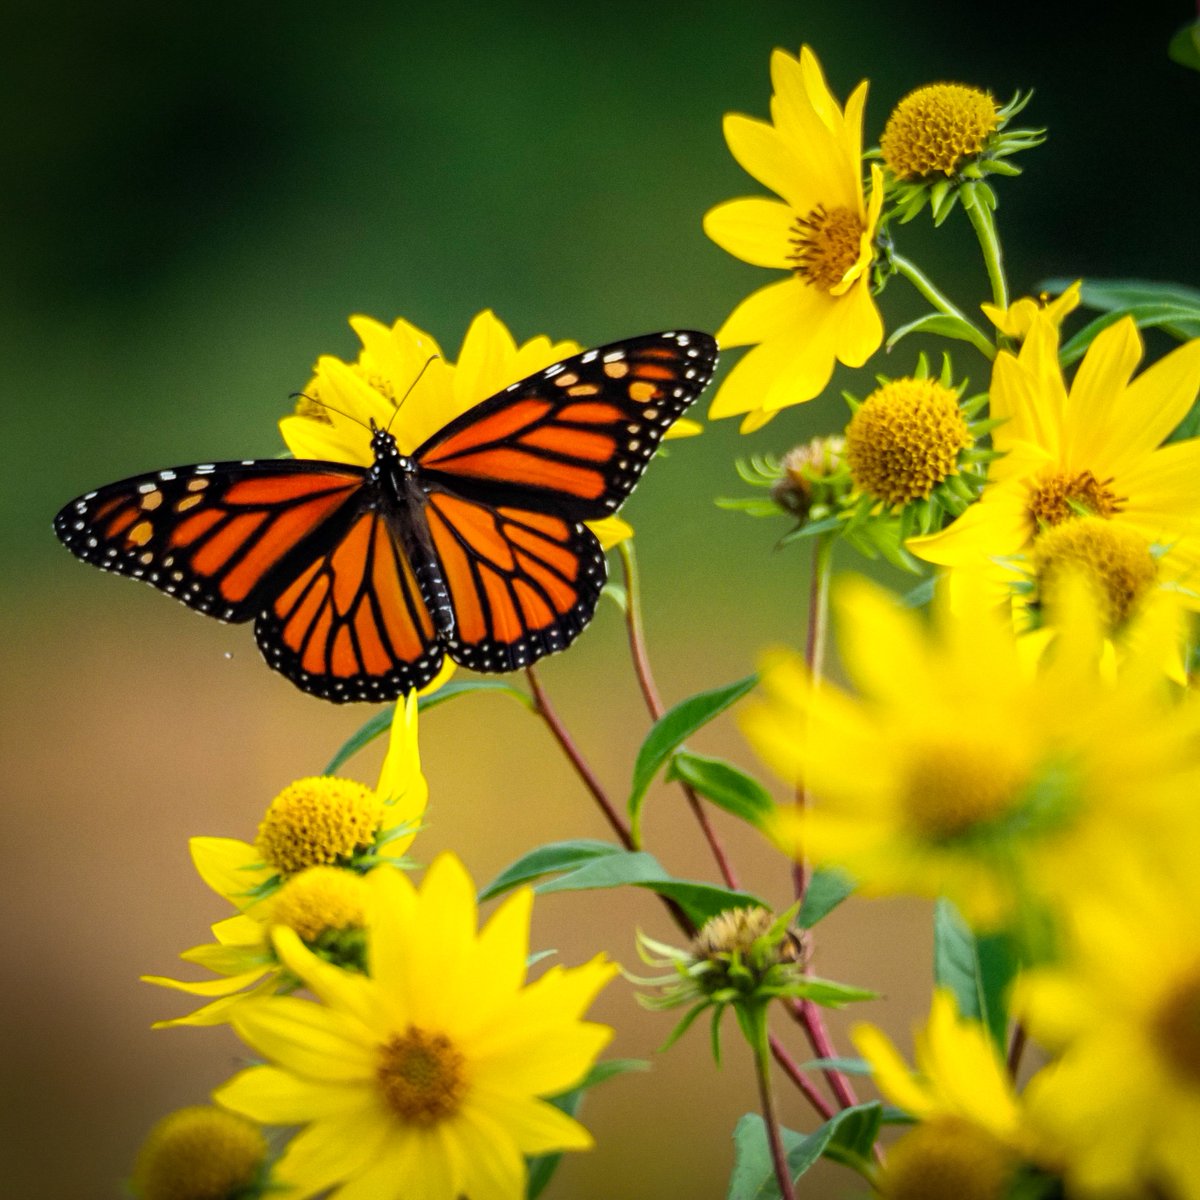 Calling all monarchs who need some protection 👑 mutualofomaha.co/3OZK0h9 👑 Wing & Feather Insurance provides butterflies everything they need for their long annual journey — travel coverage if they run into bad weather, medications to fight off disease and plenty of milkweed.